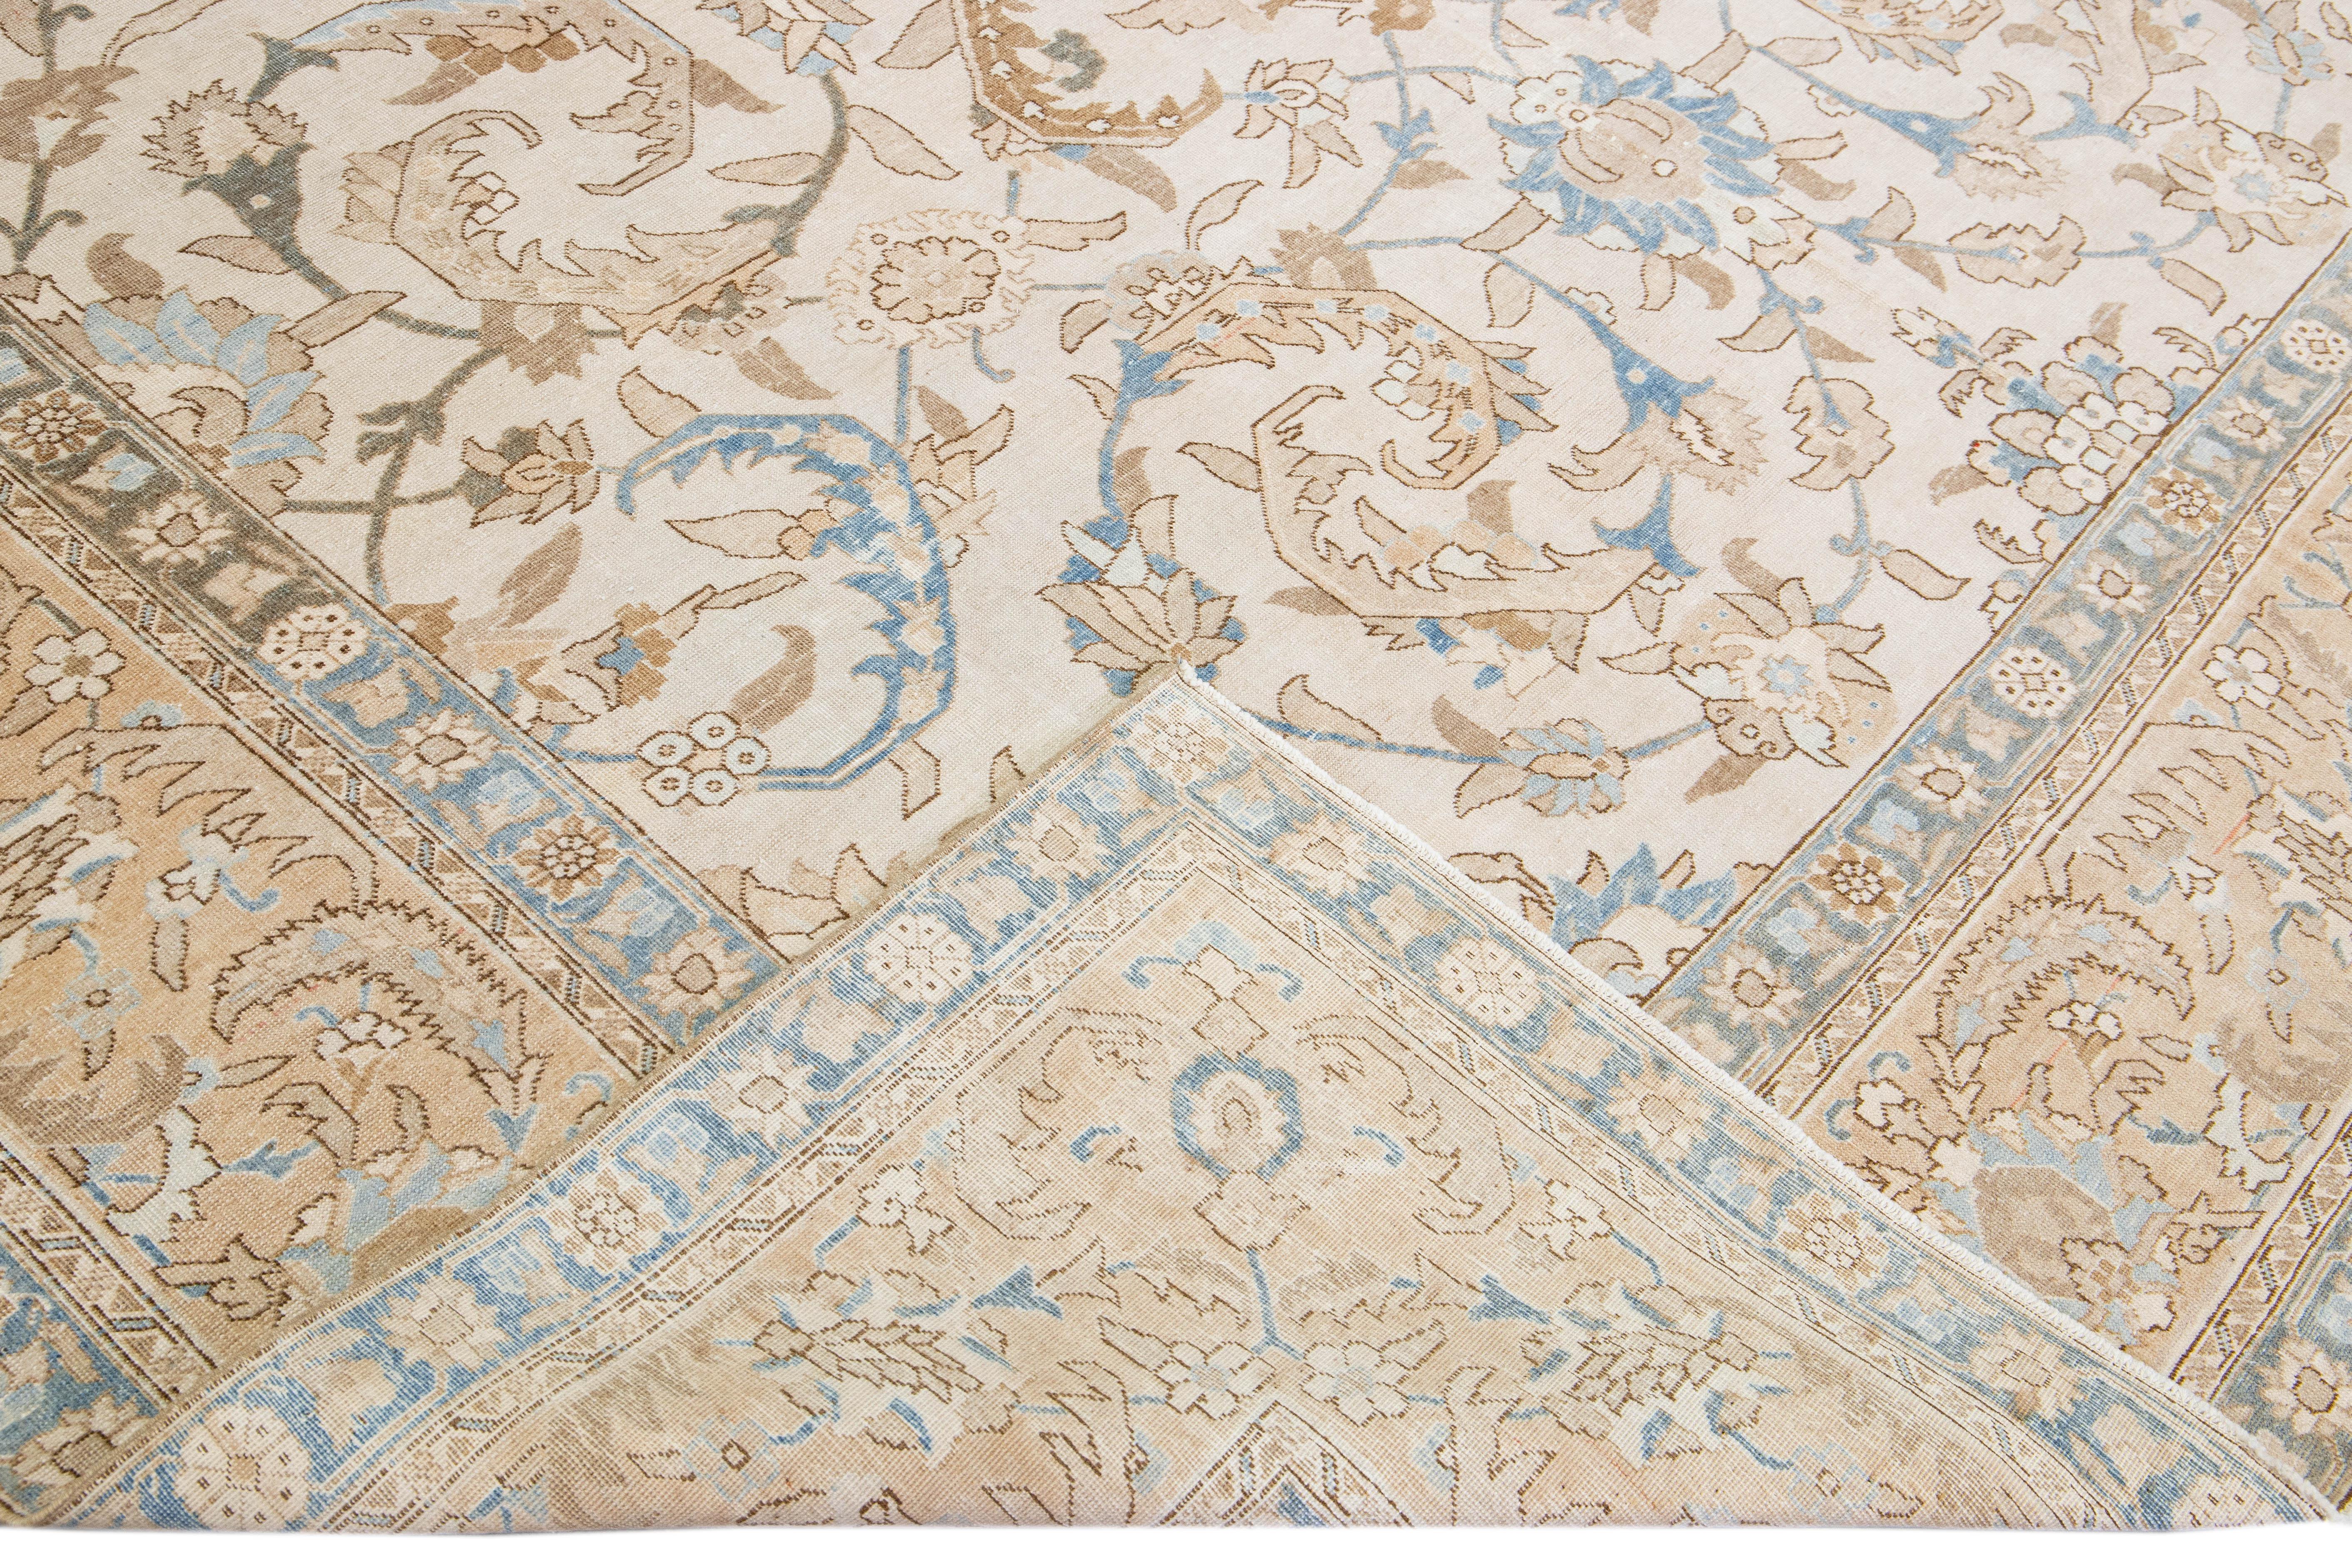 Beautiful antique Persian Tabriz hand-knotted wool rug with a beige field. This piece has a rusted floral frame and blue accents in an all-over gorgeous floral design.

This rug measures: 9'9